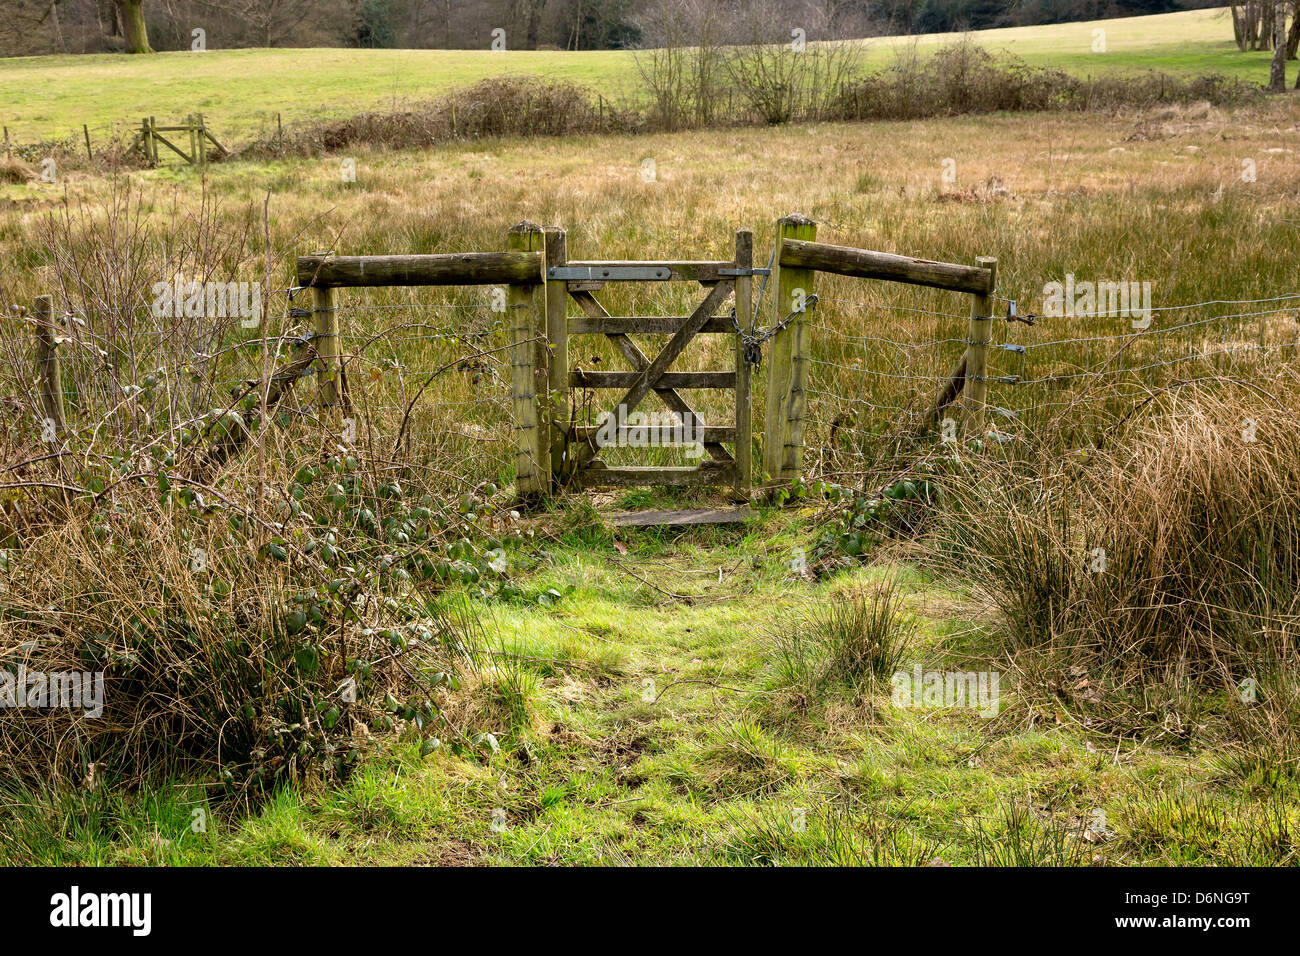 Closed Old Rustic Gate in Green Grassy Countryside on Sunny Day Stock Photo